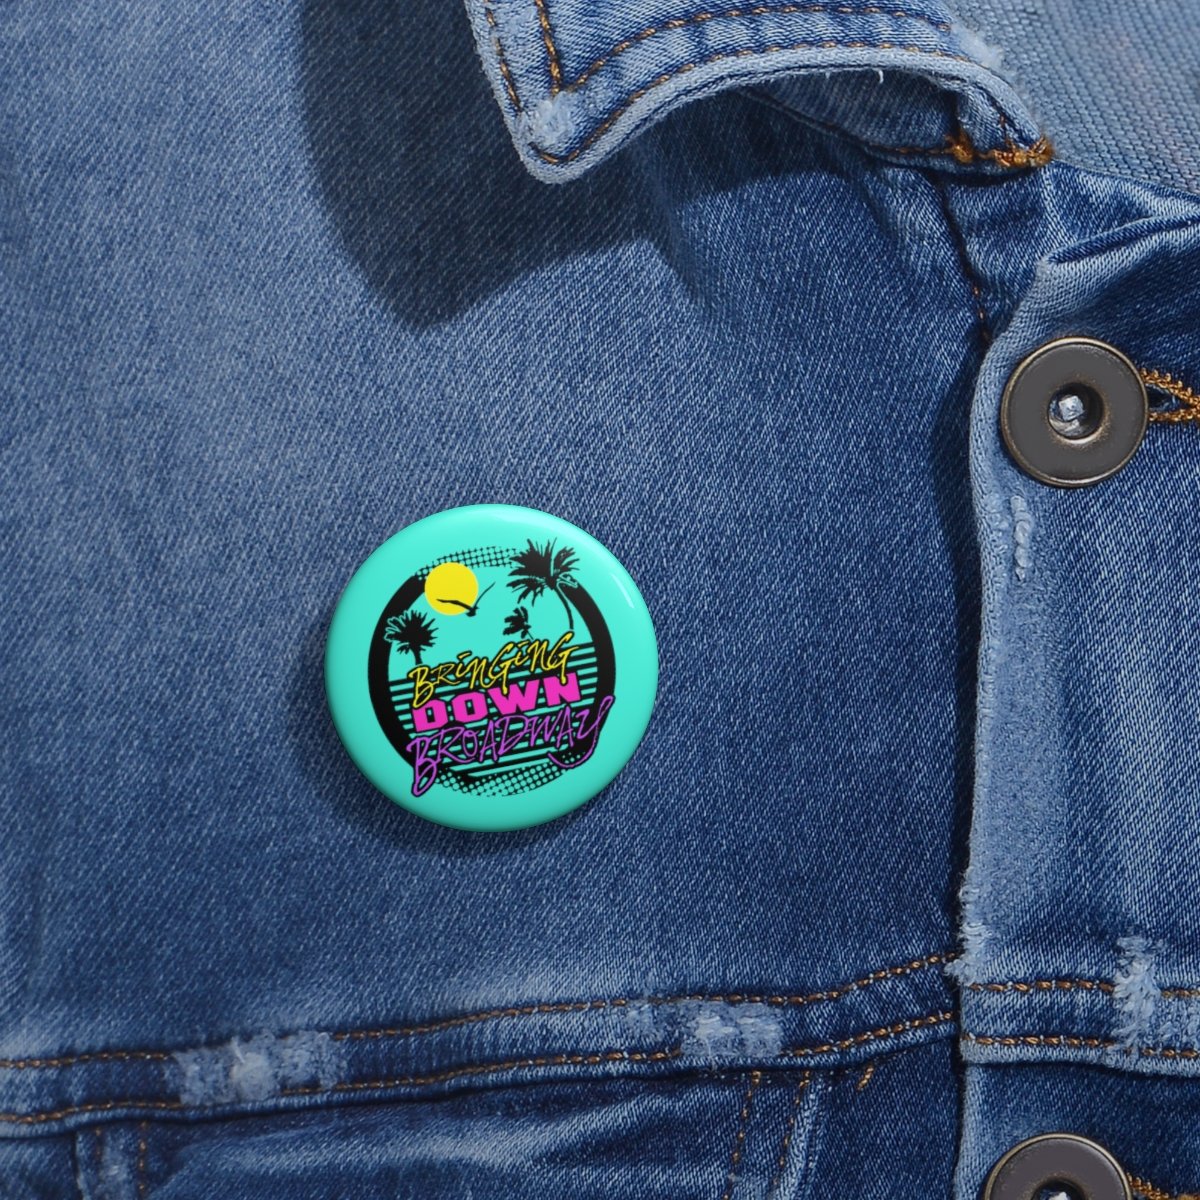 Bringing Down Broadway – Sun Pin Buttons (Teal)